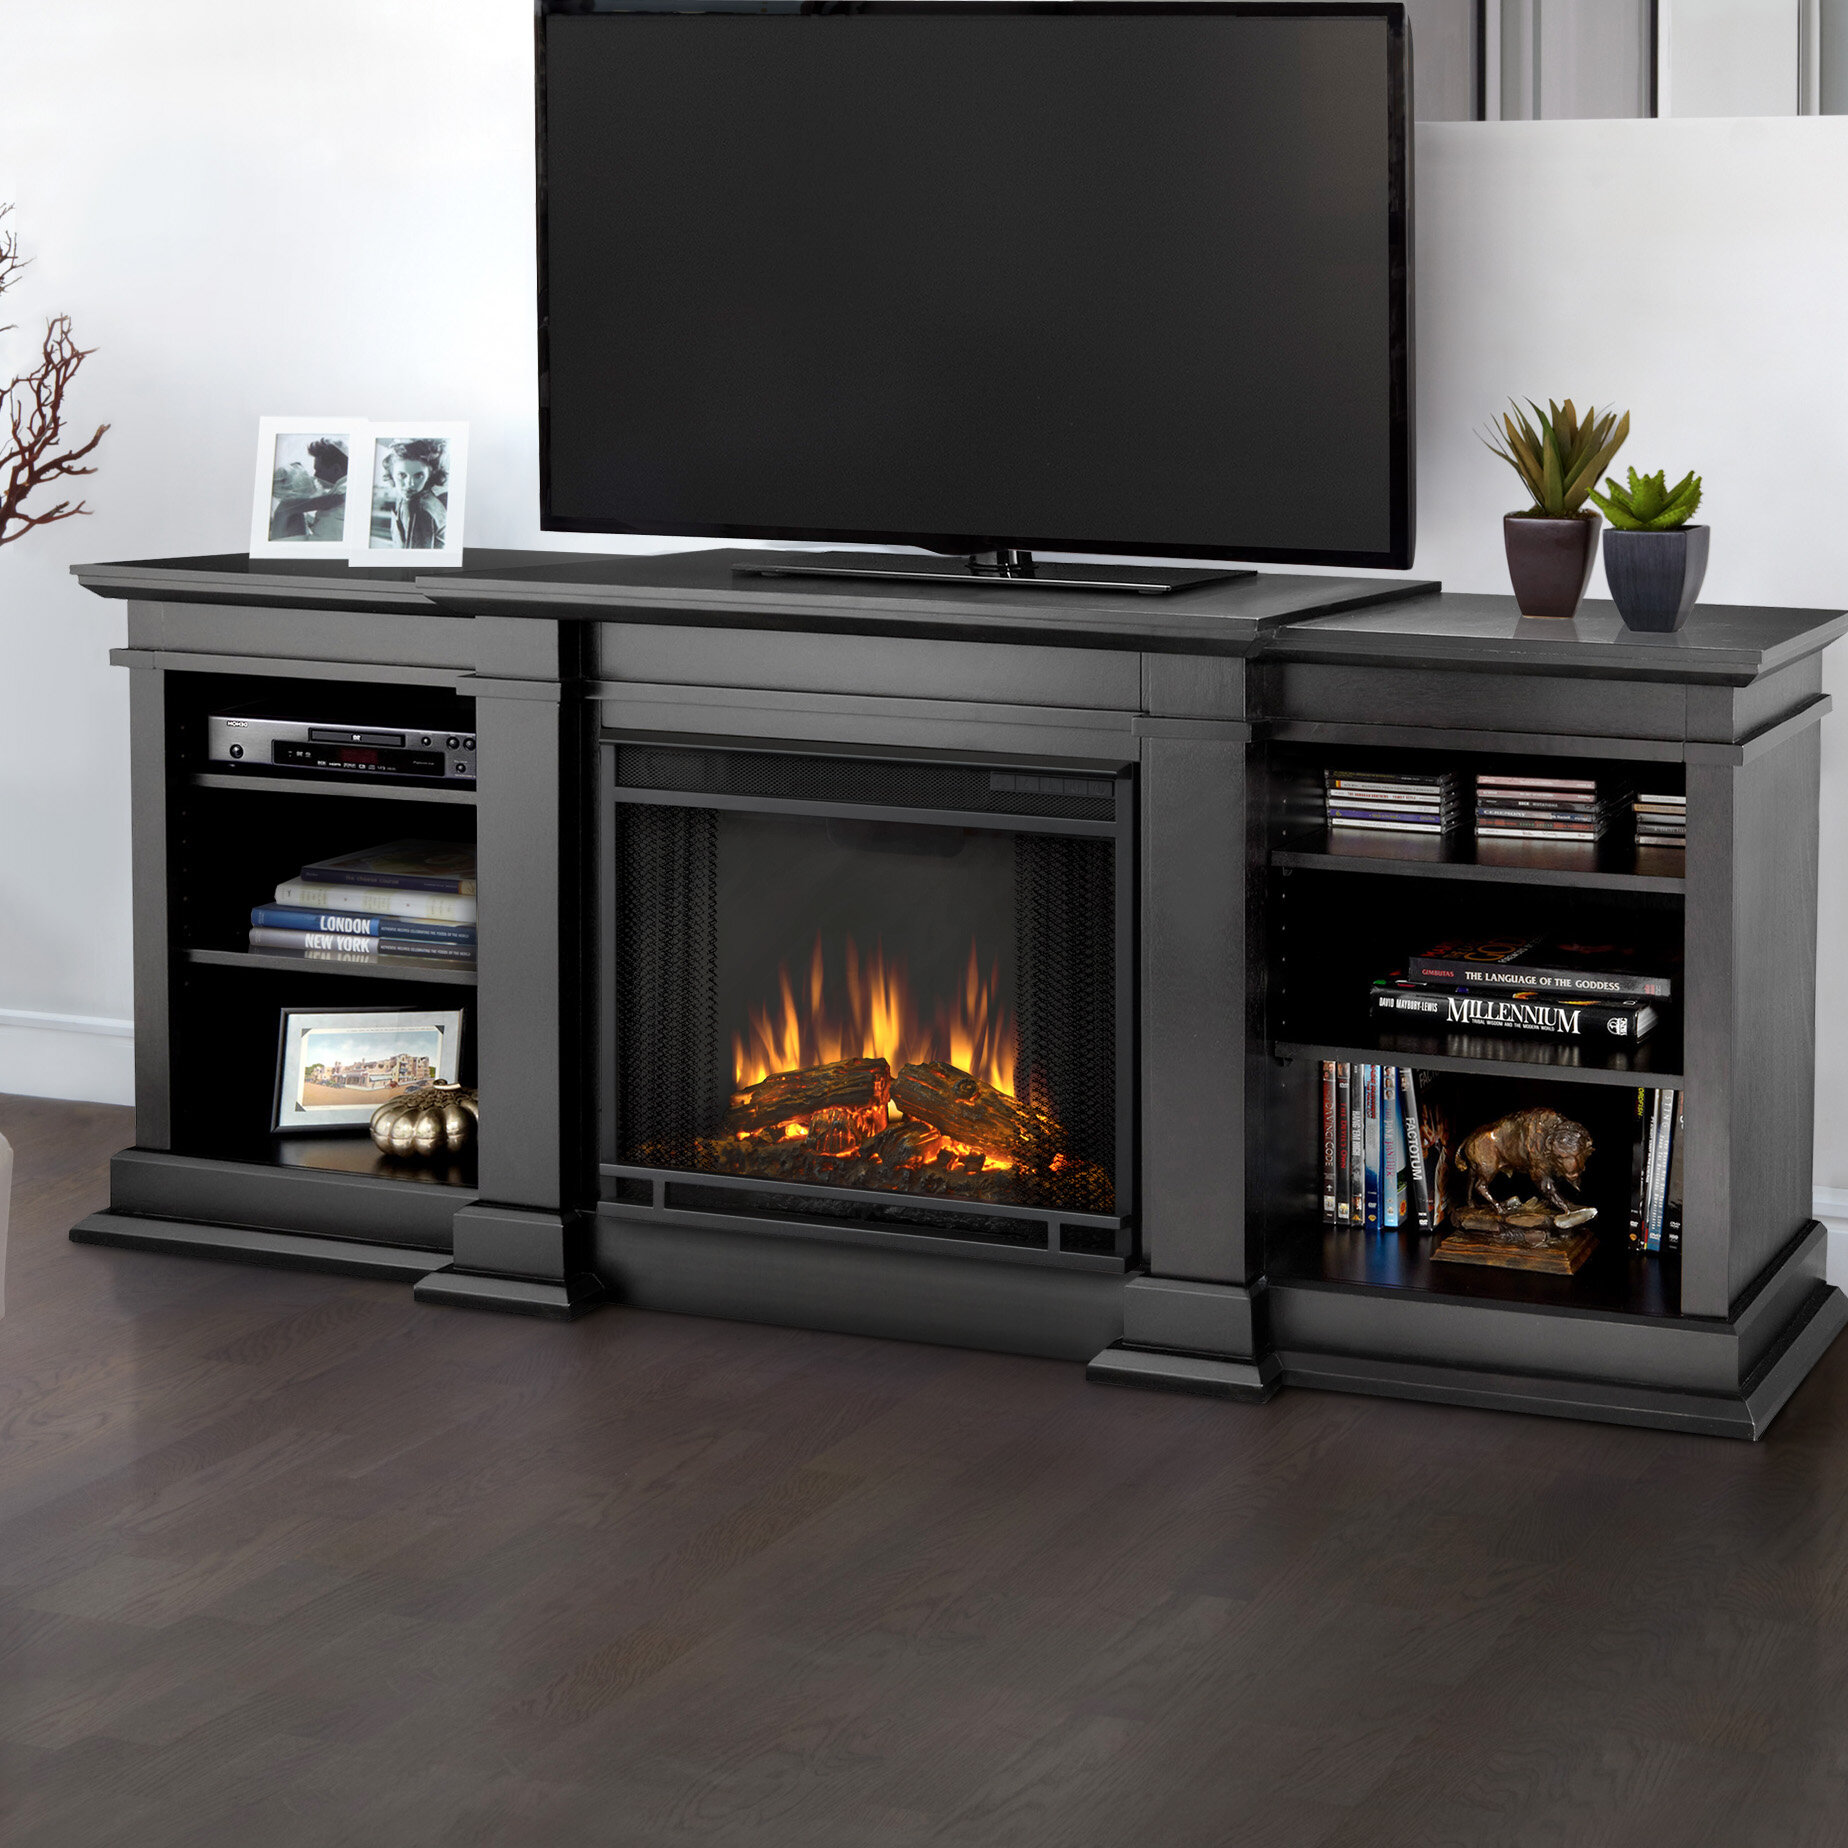 Cheap Fireplace Tv Stand Best Of Kalliope 60 5 Tv Stand